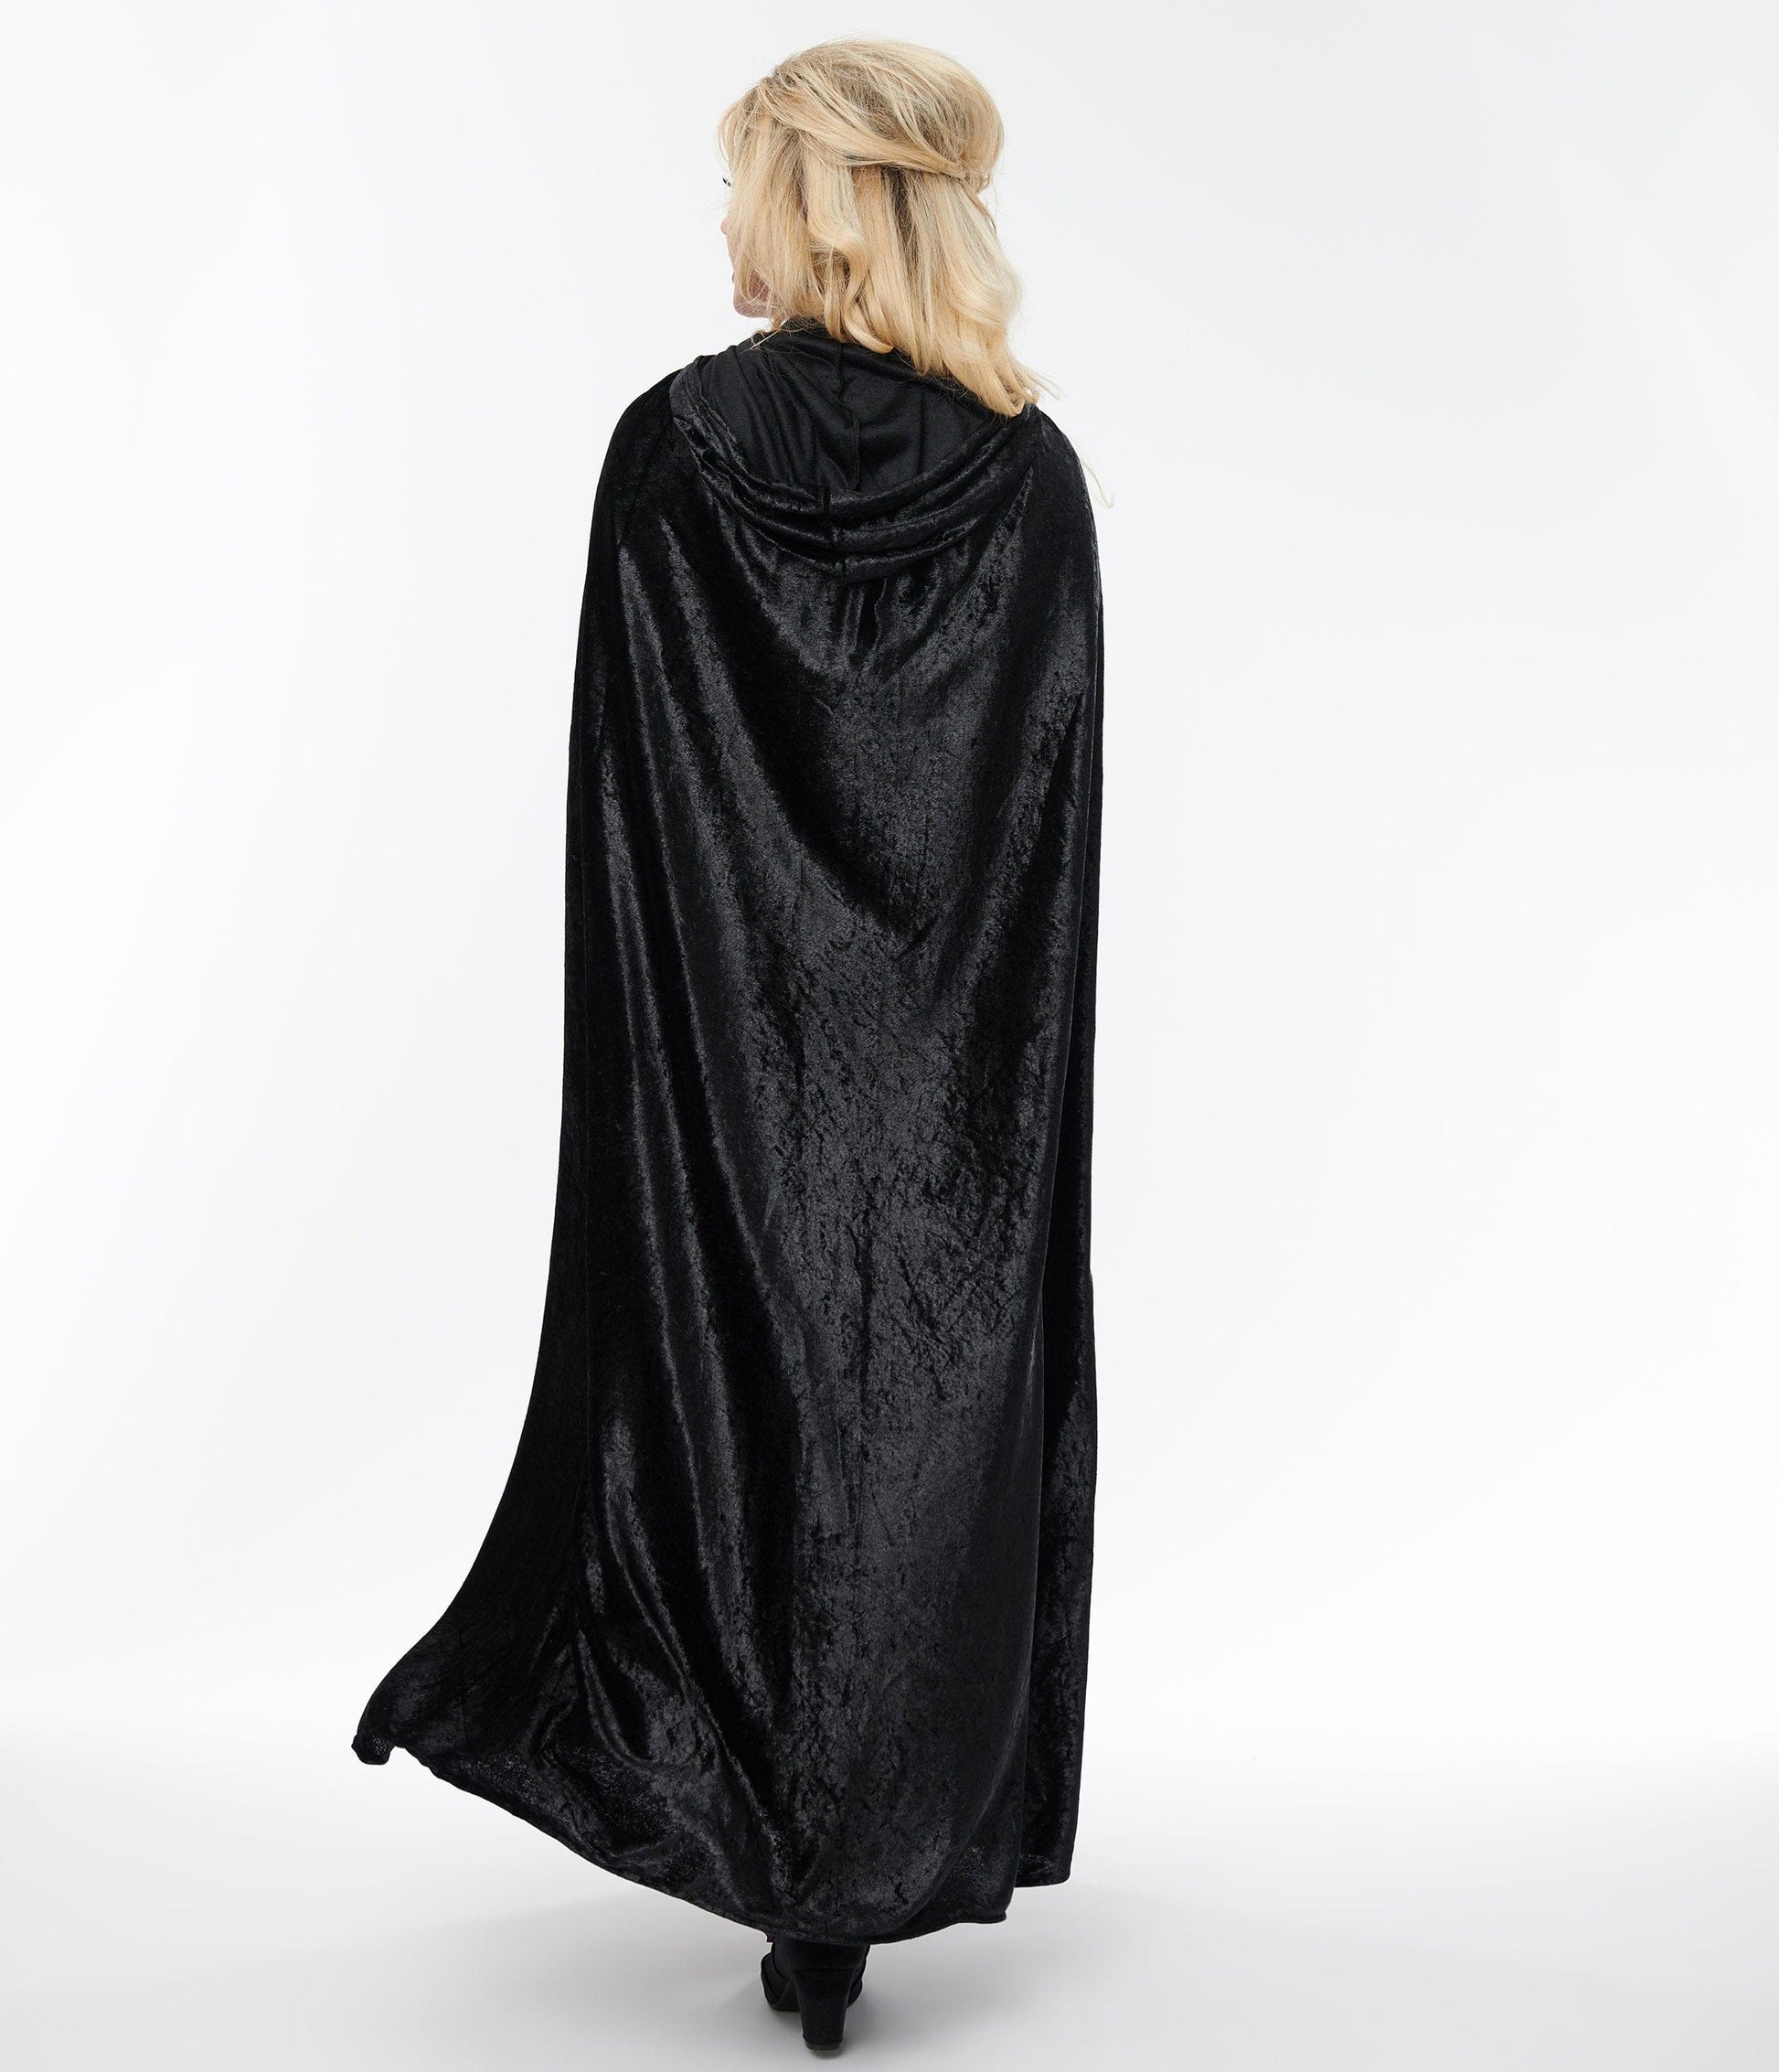 Products Black Crushed Velvet Hooded Cape | Halloween Accessories